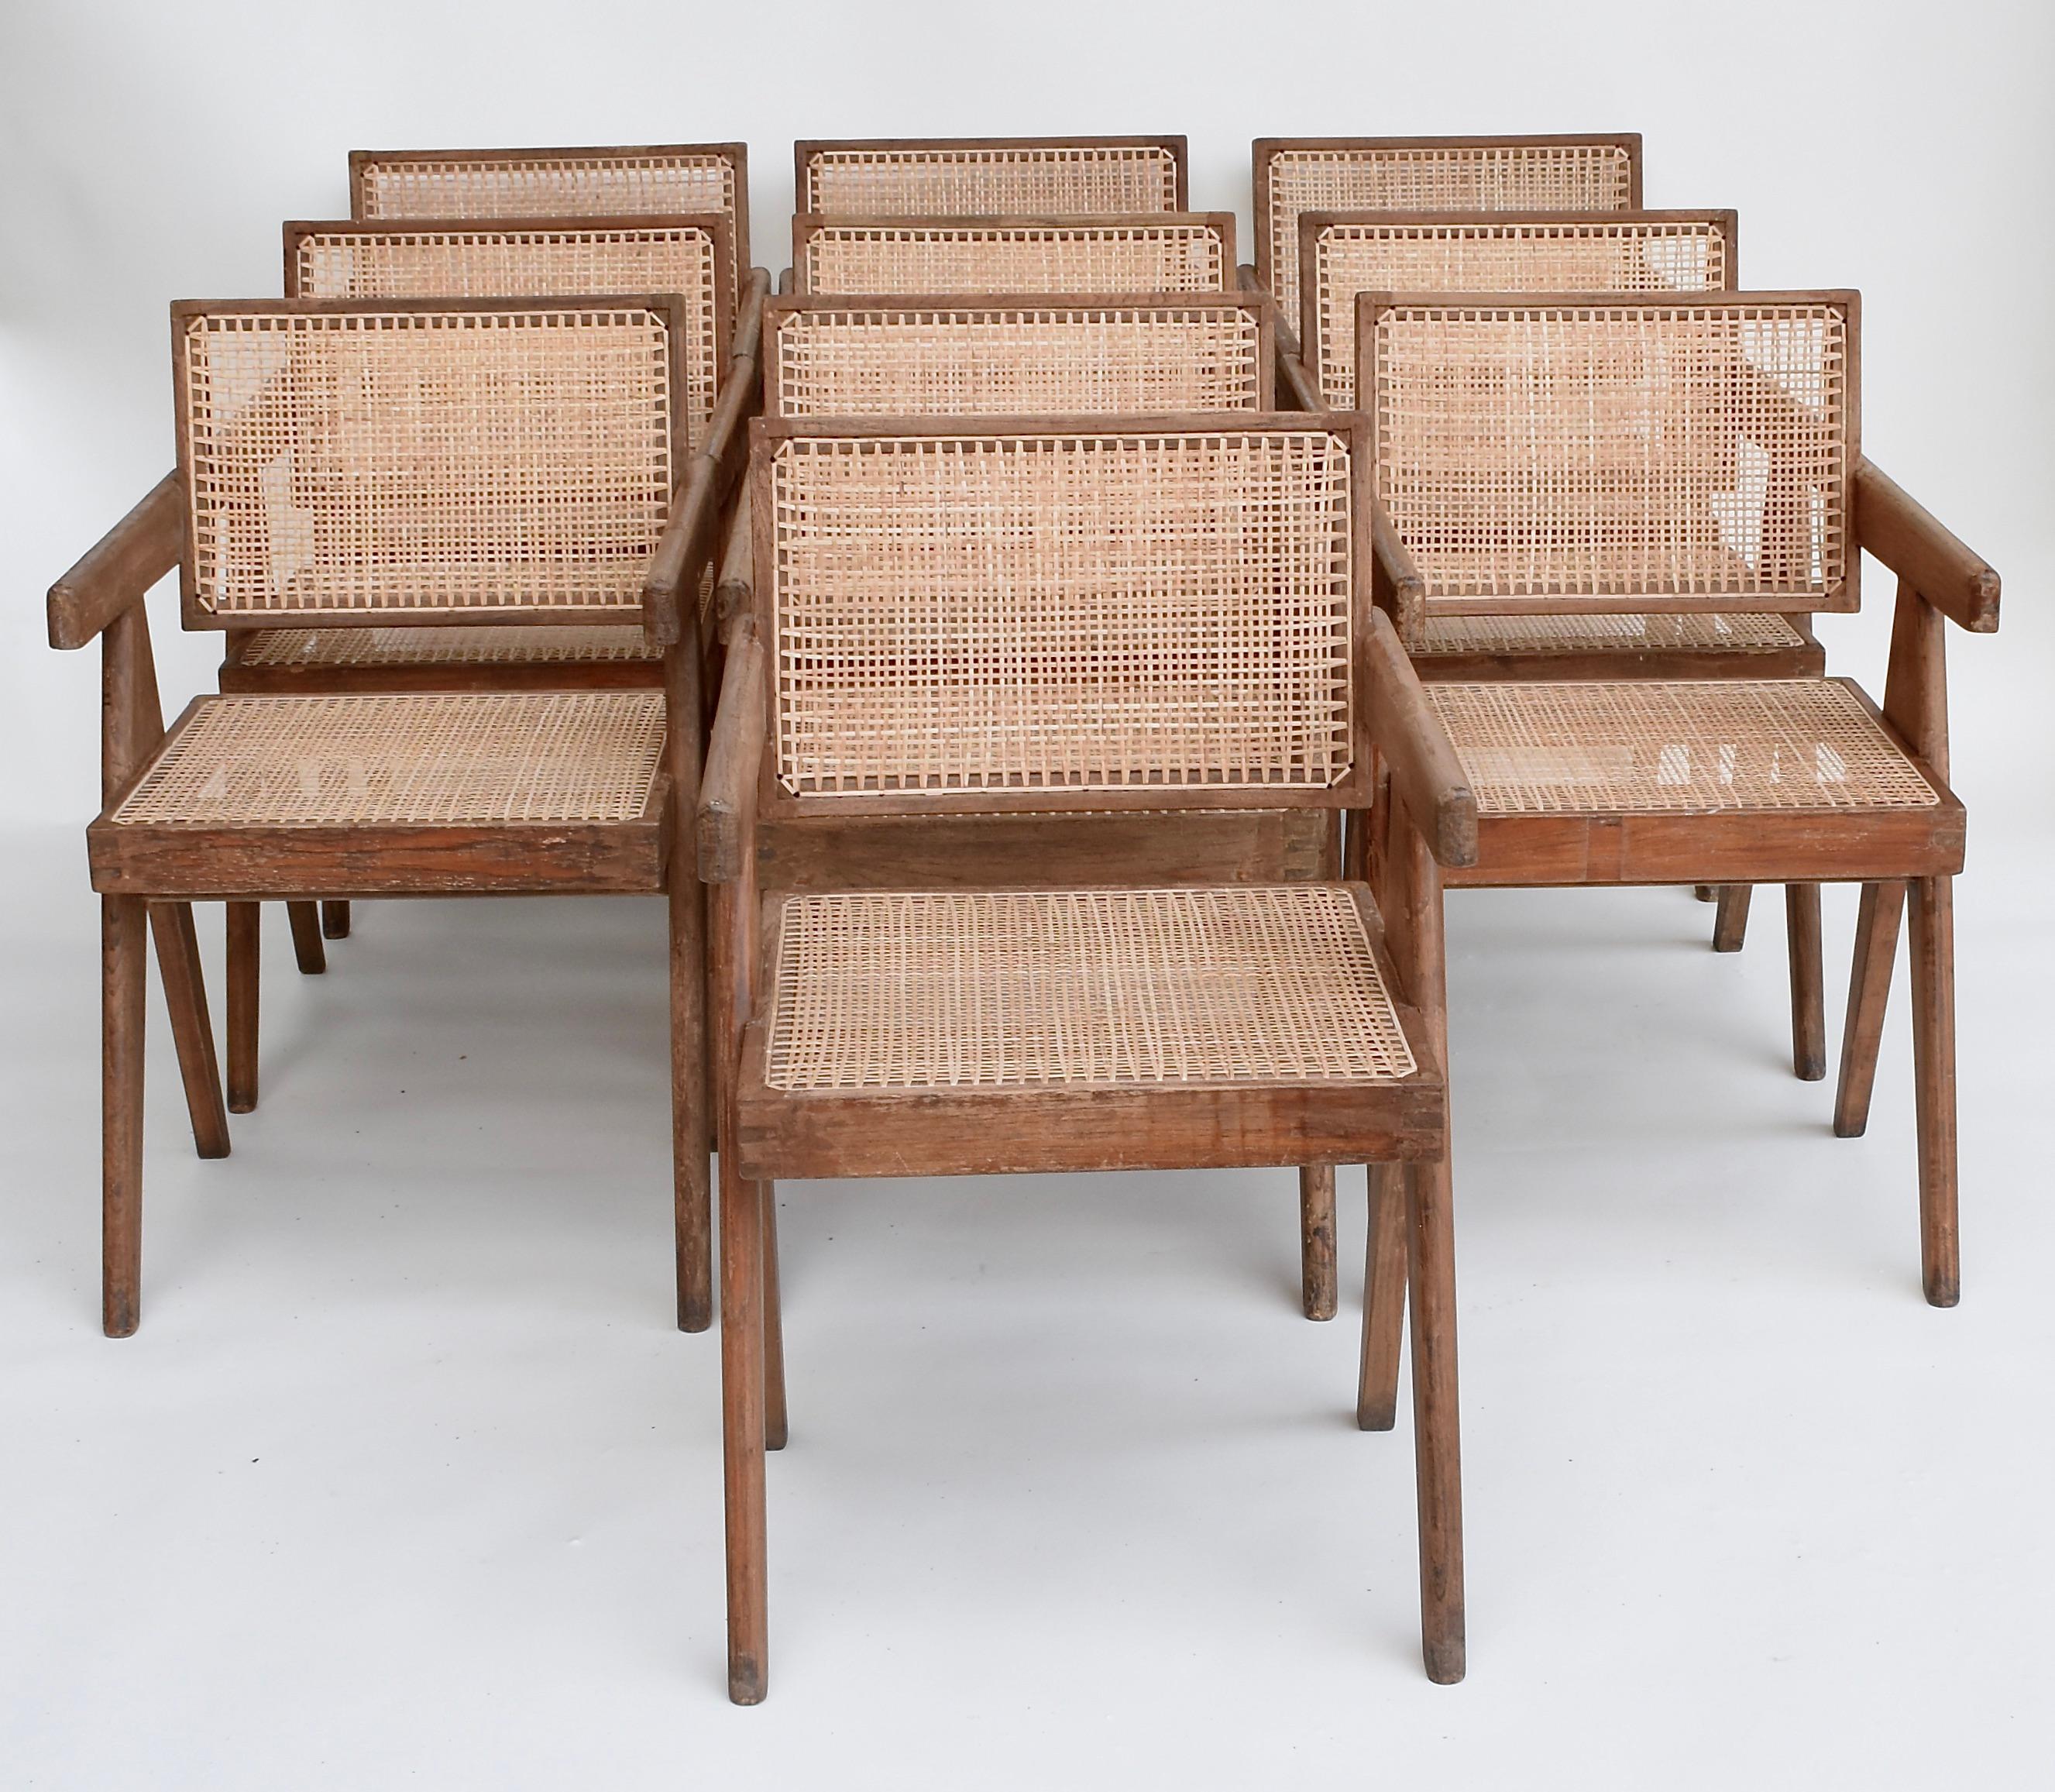 A set of 10 Pierre Jeanneret floating back office chairs in a beautiful natural teak color.  All chairs are in good vintage condition. 
The braided canework has been replaced.
These iconic pieces were part of the administrative buildings in